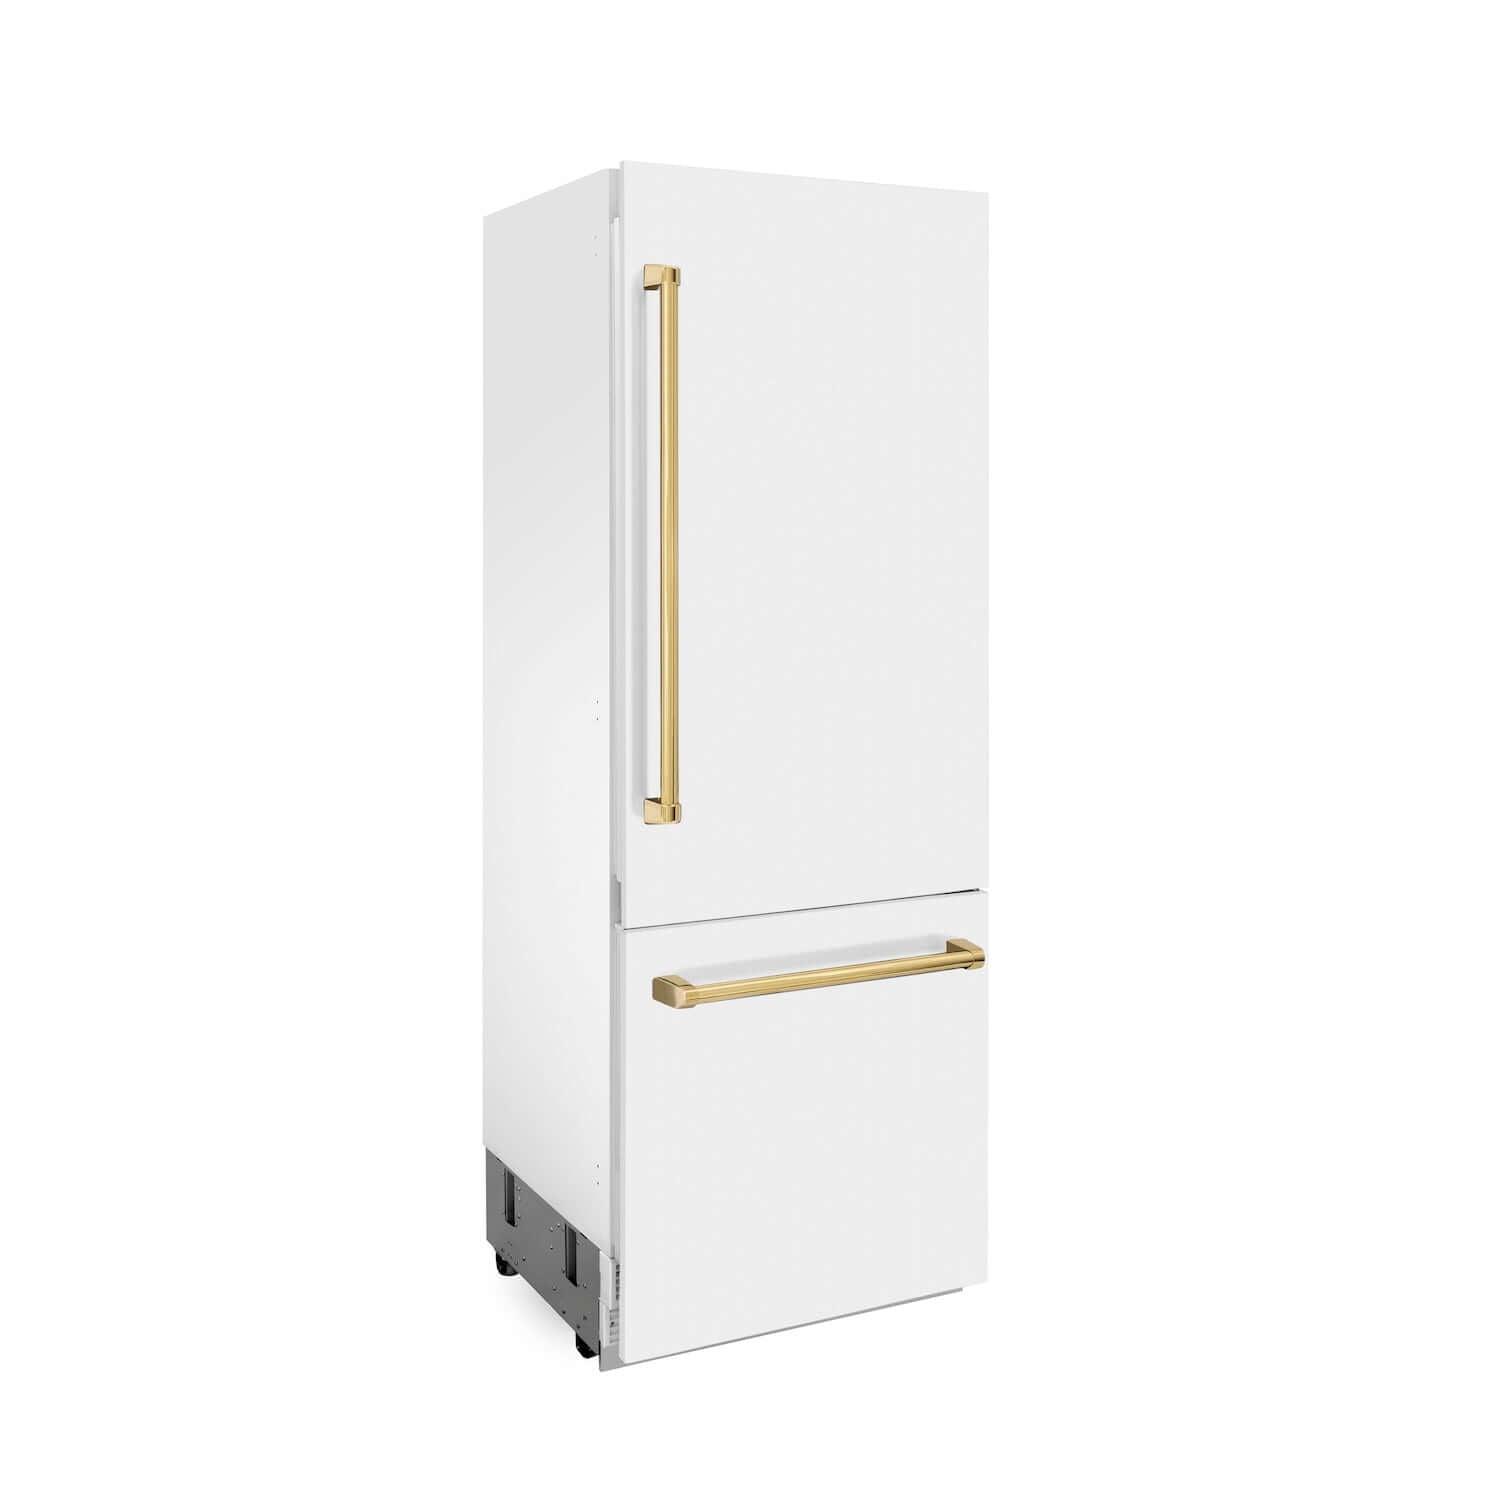 ZLINE Autograph Edition 30 in. 16.1 cu. ft. Built-in 2-Door Bottom Freezer Refrigerator with Internal Water and Ice Dispenser in White Matte with Polished Gold Accents (RBIVZ-WM-30-G) side.